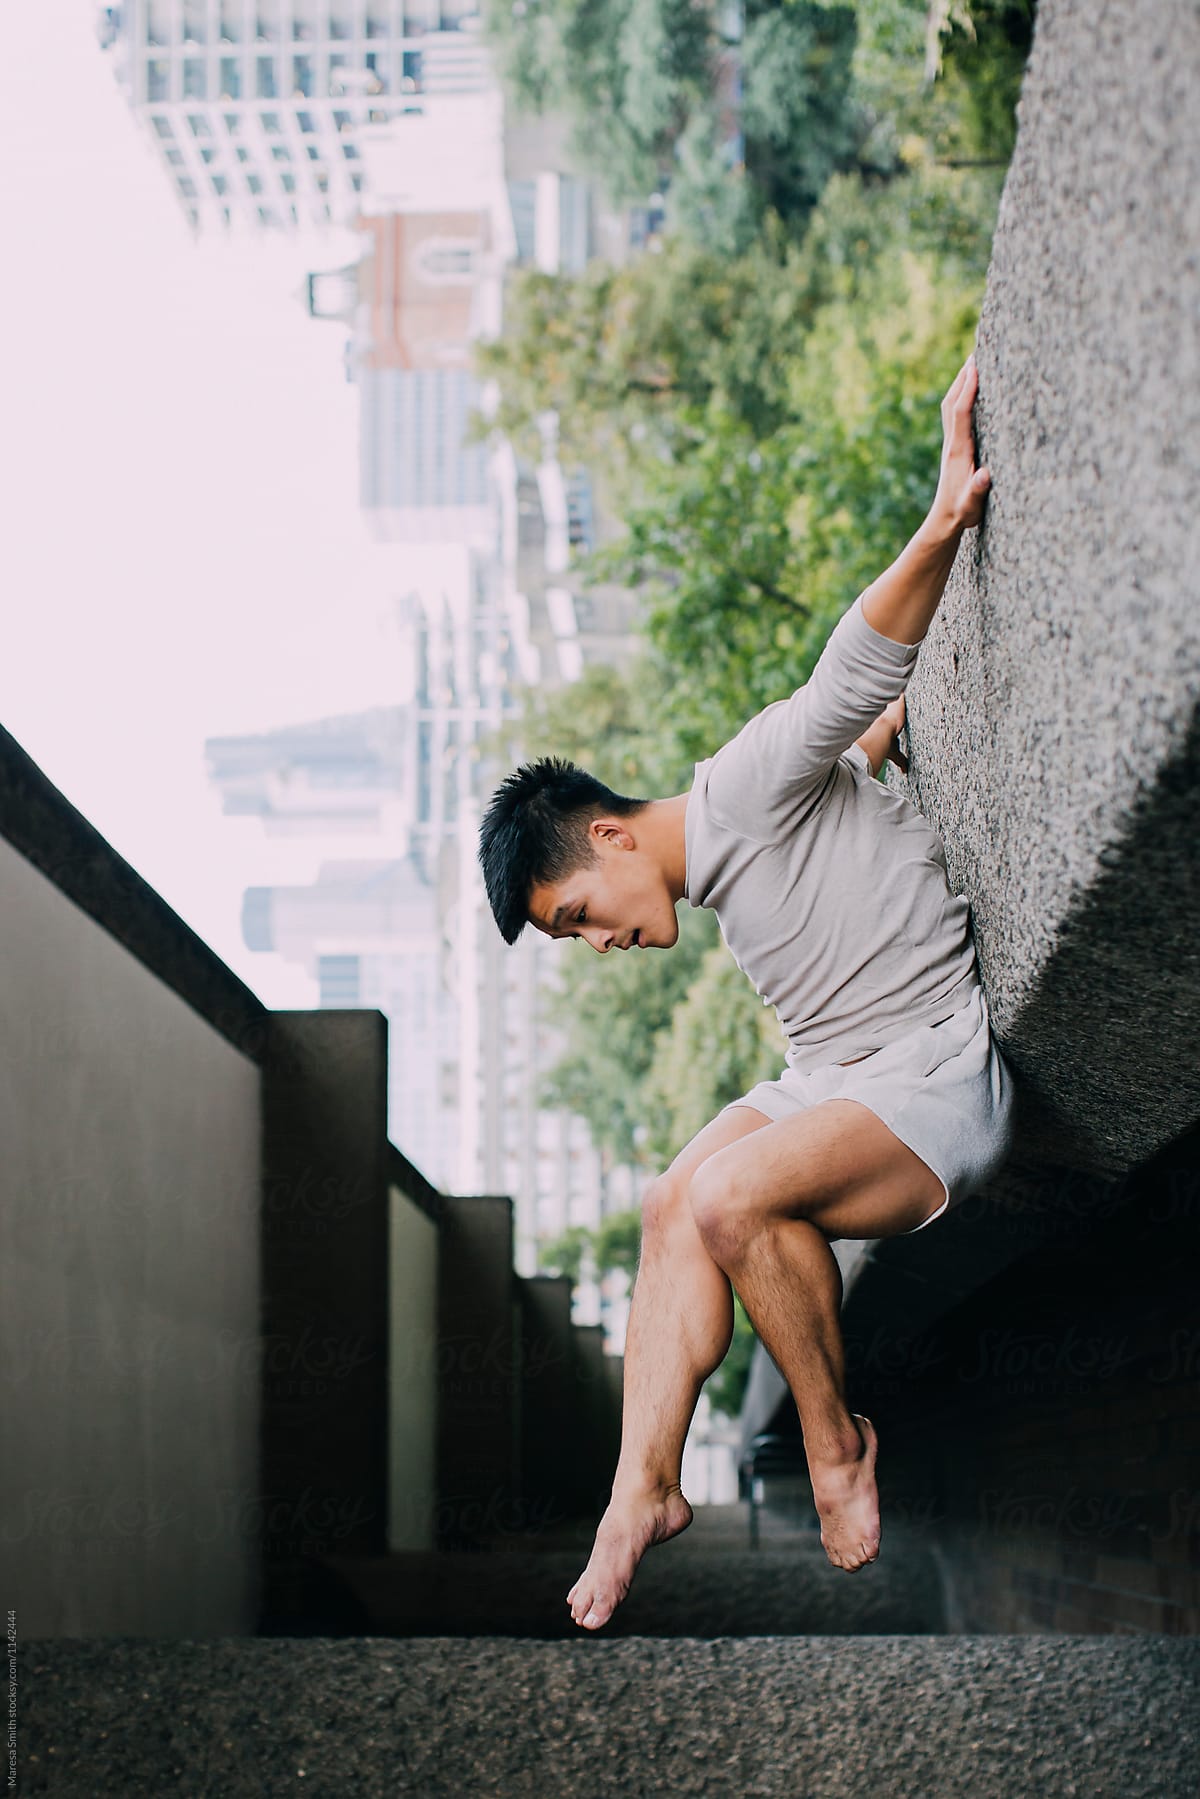 An asian man appears to be hanging from a concrete ledge in an urban location